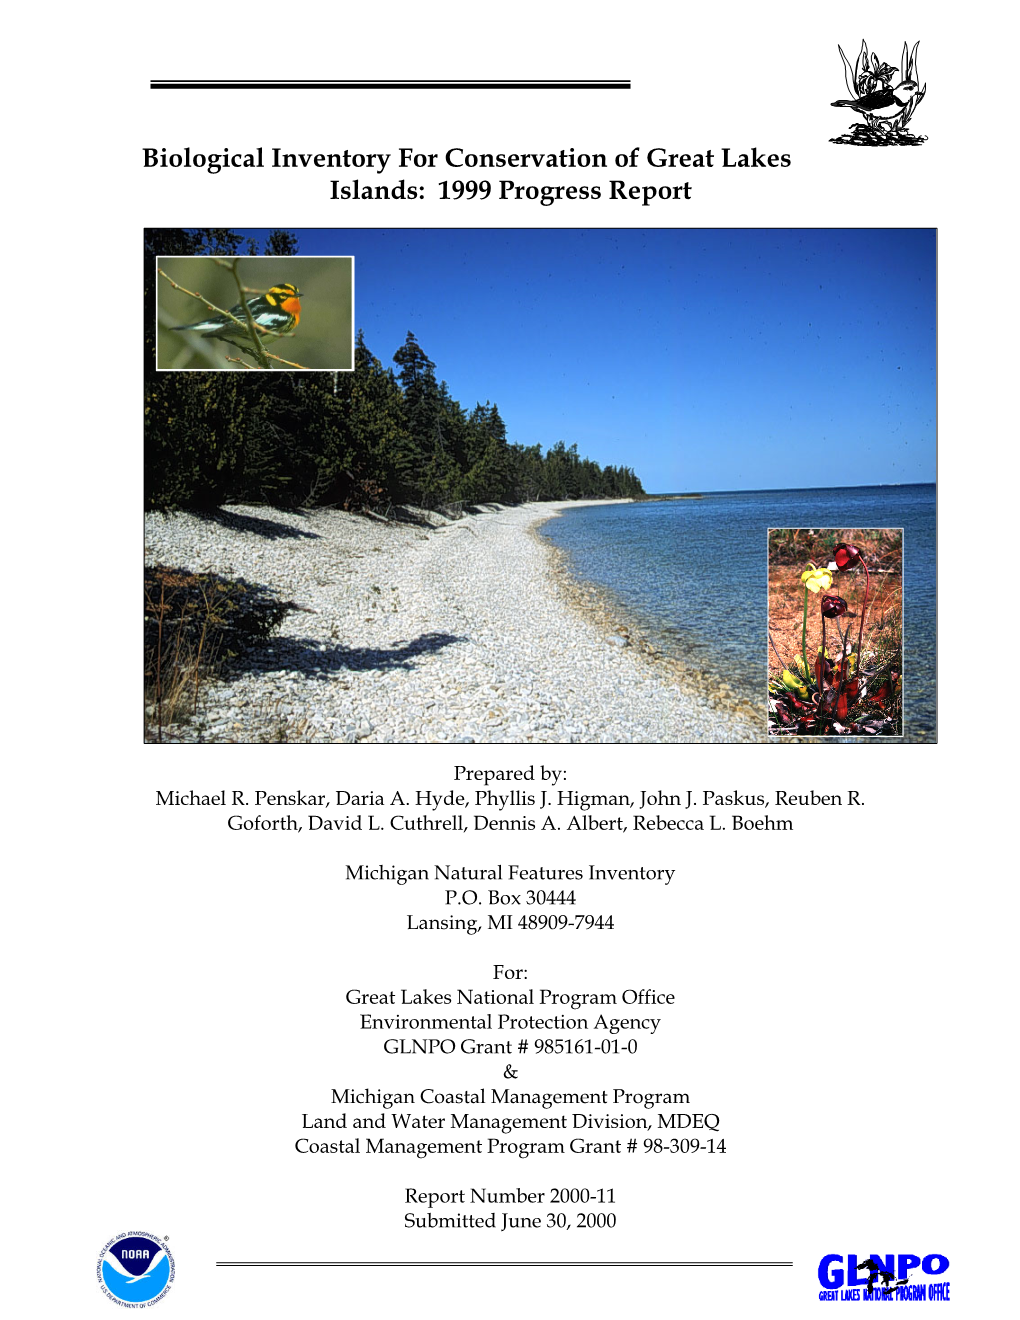 Biological Inventory for Conservation of Great Lakes Islands: 1999 Progress Report